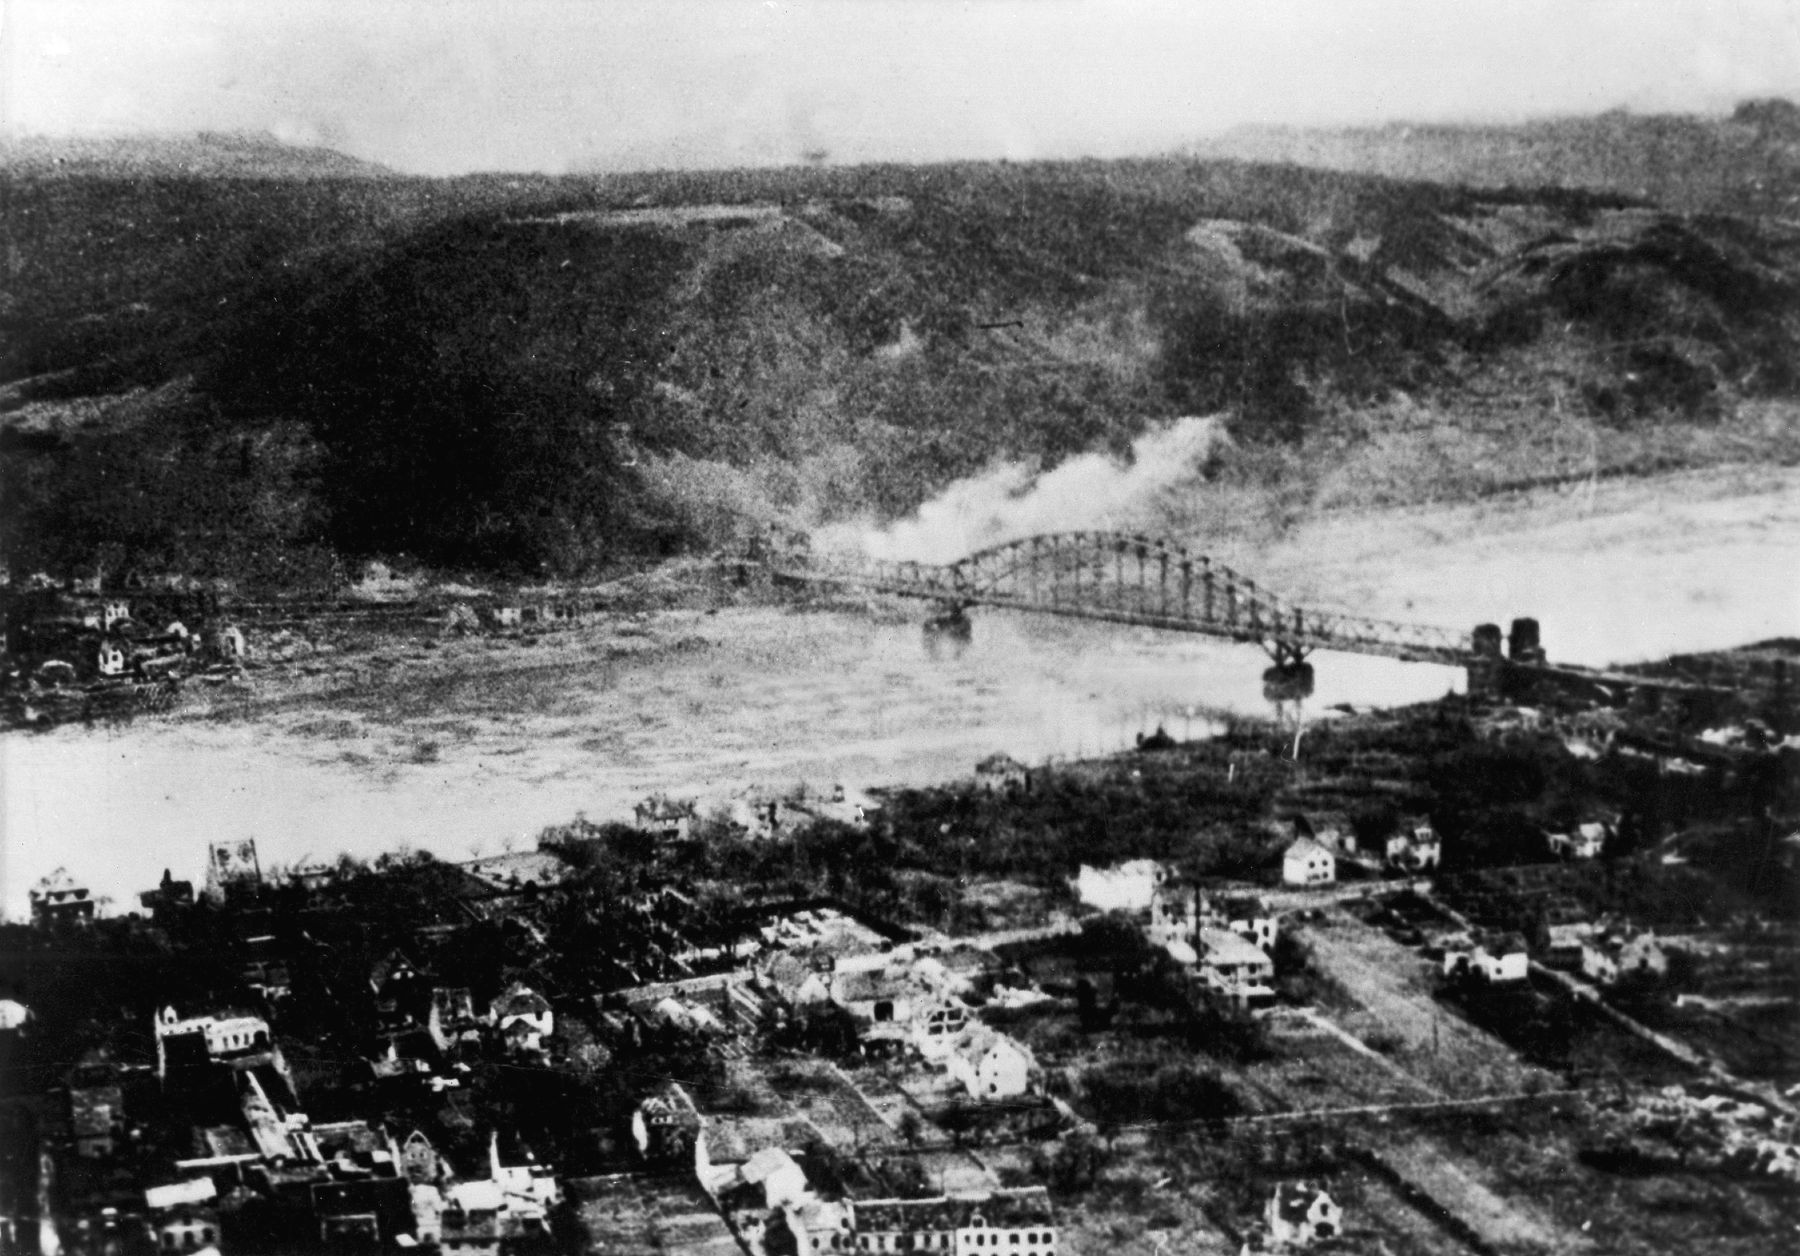 After its capture on March 7, 1945, the Ludendorff Bridge is shelled by the Germans who are trying to prevent any more American First Army troops and supplies from moving across.